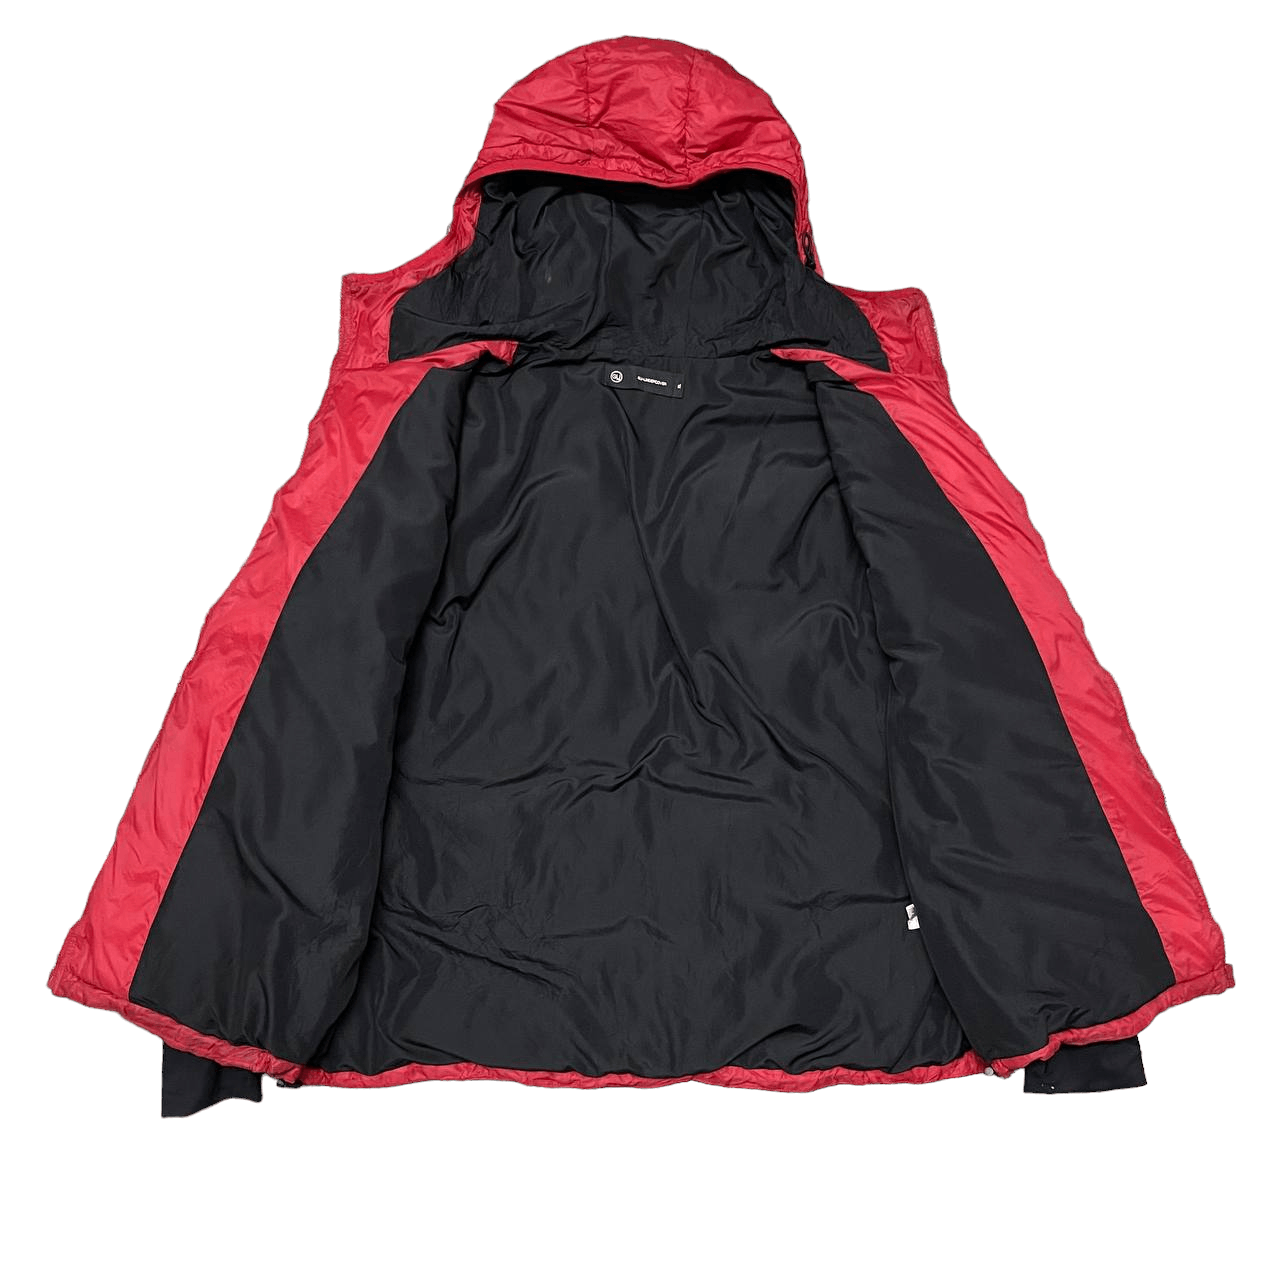 Undercover GU Padded Puffer Jacket Red XL - 11